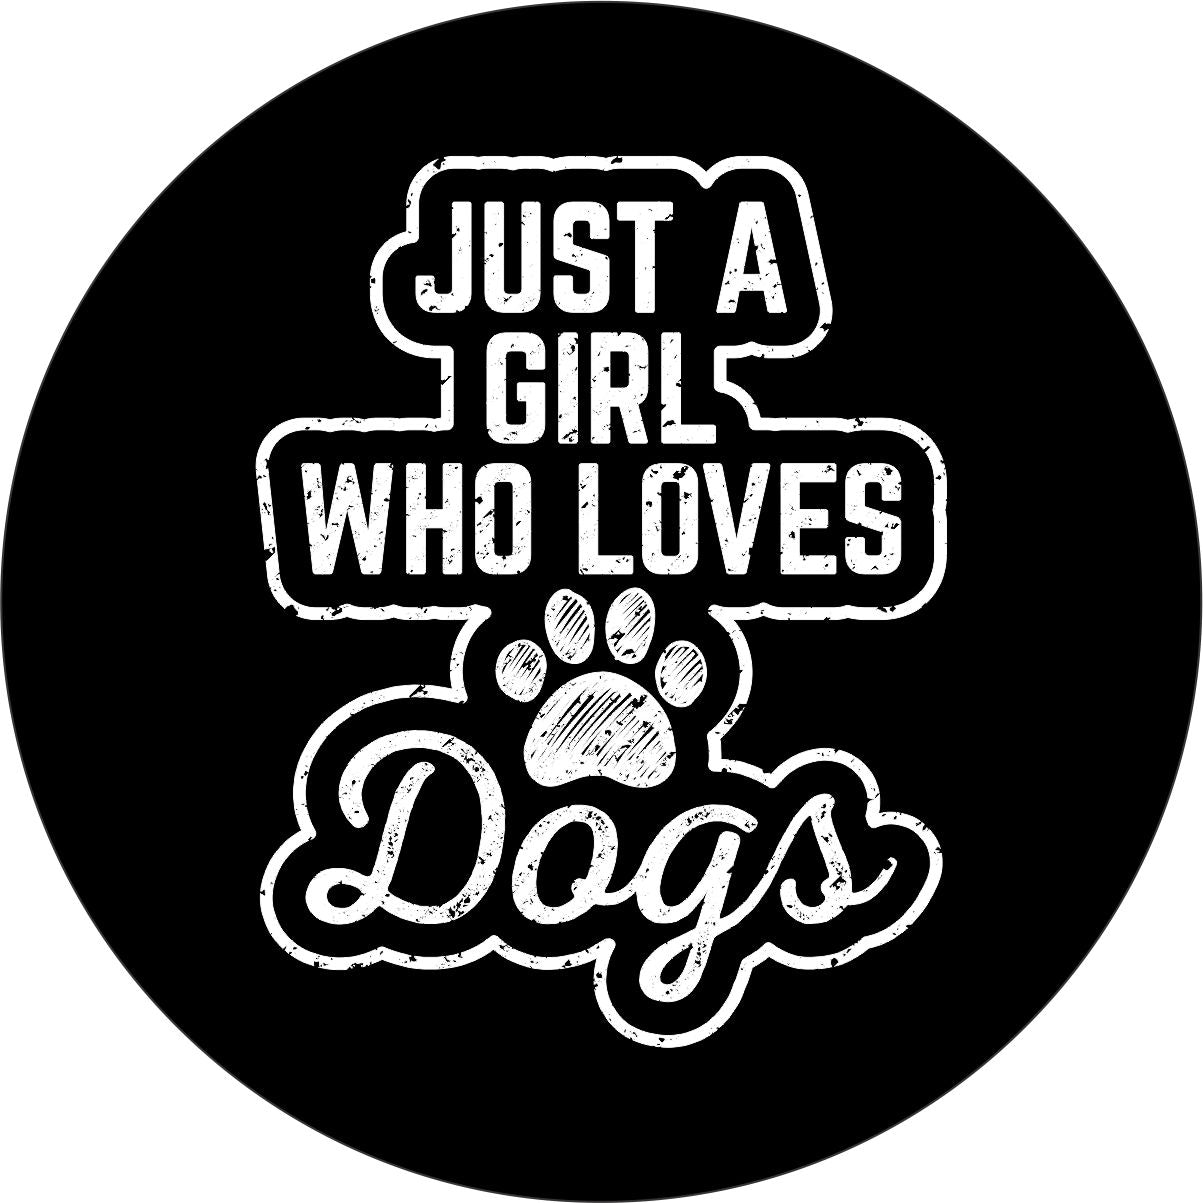 Just a girl who loves dogs written in a chalk font design with a paw print as a spare tire cover design for a Jeep, Bronco, RV, van, camper or any other vehicle's spare tire cover.